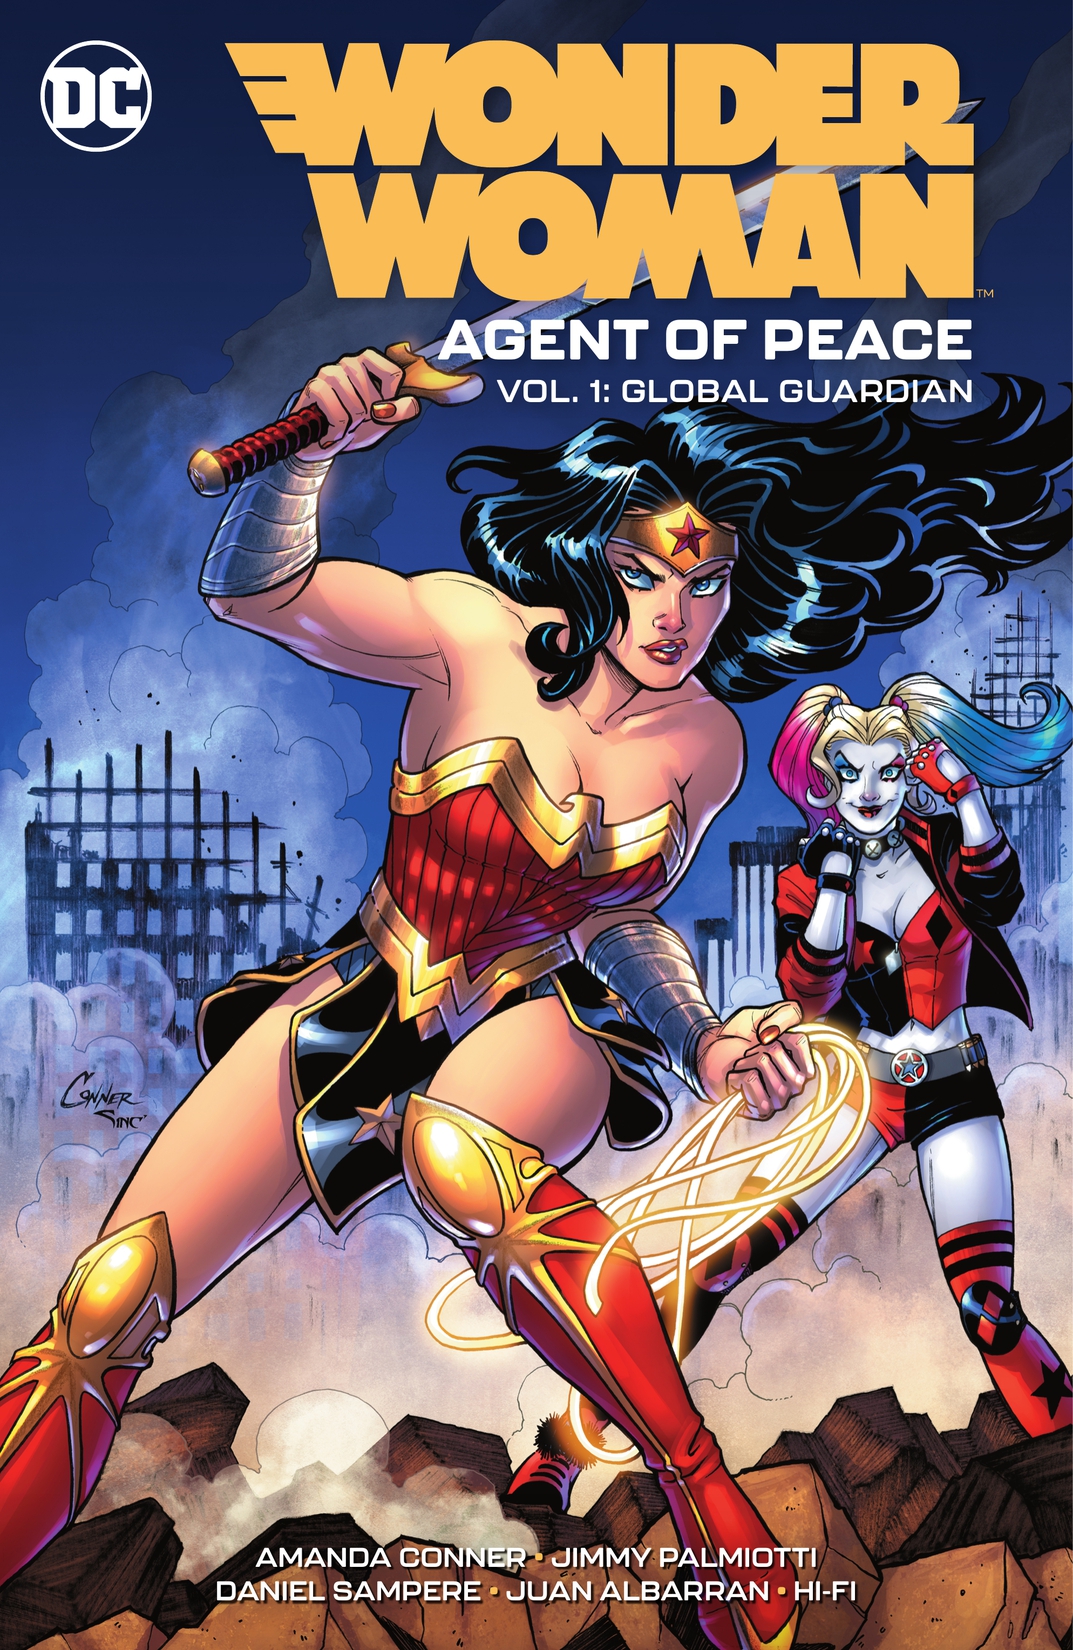 Wonder Woman: Agent of Peace Vol. 1: Global Guardian preview images